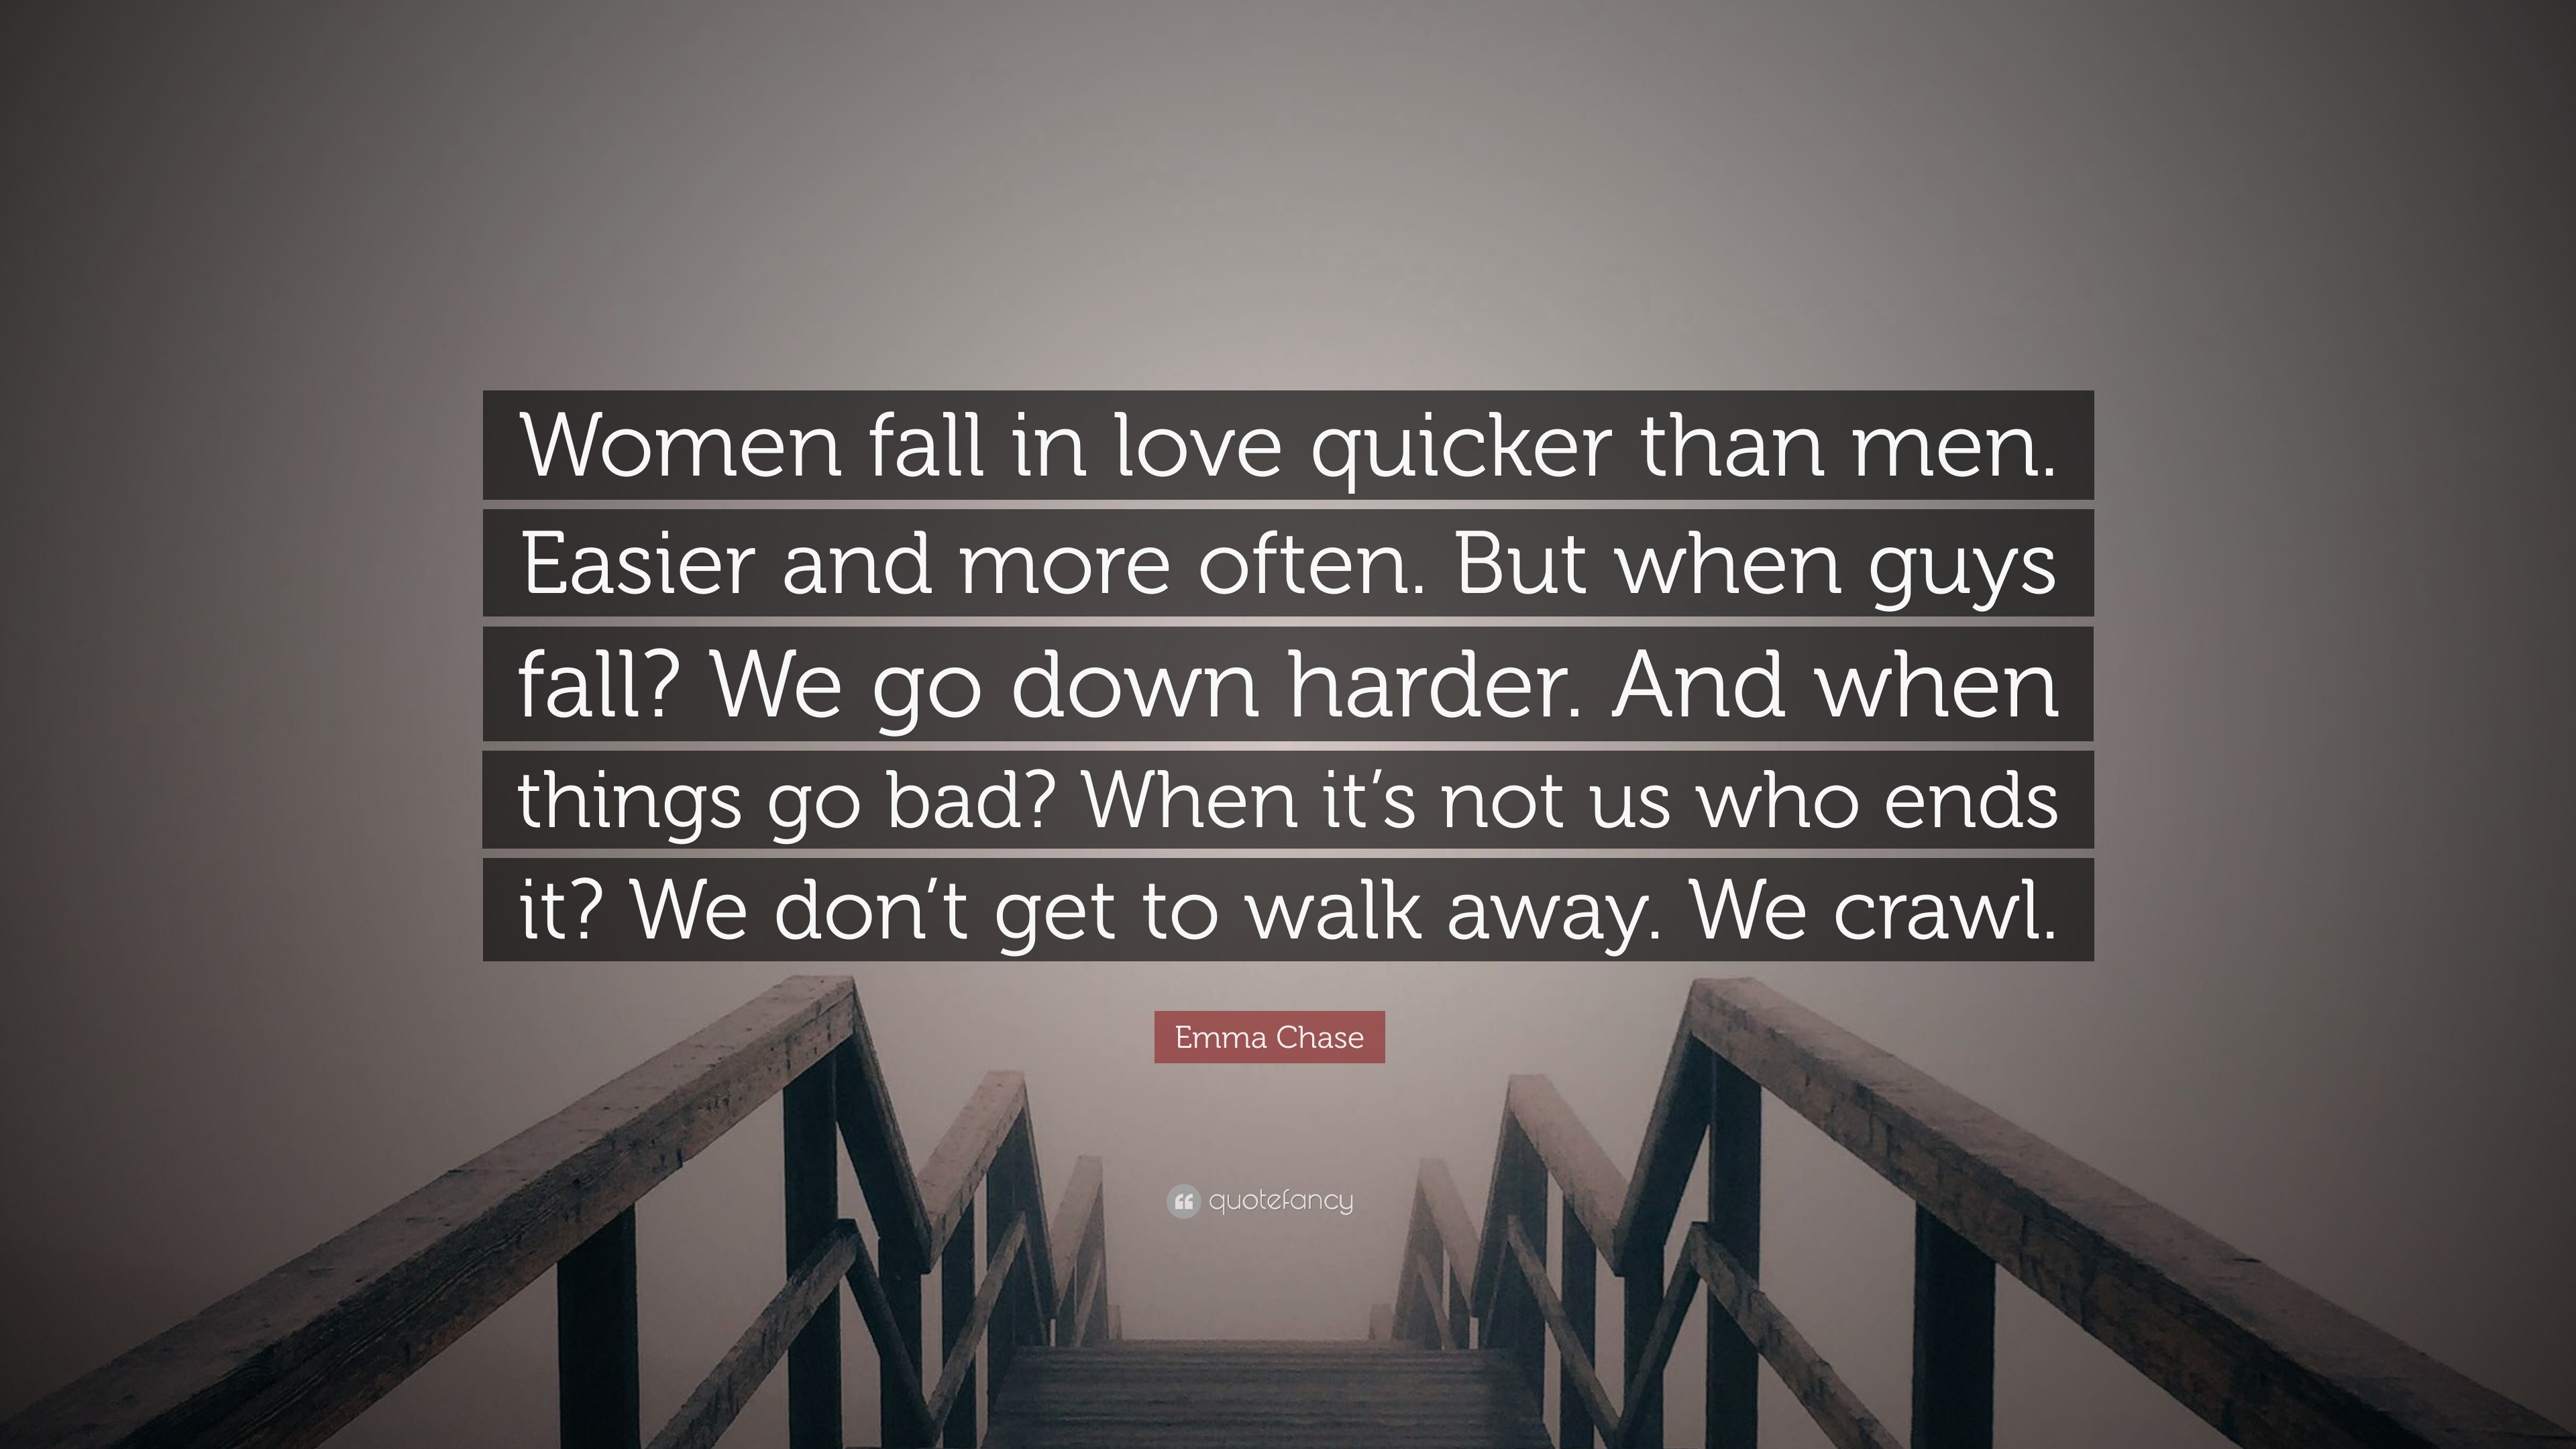 Emma Chase Quote “Women fall in love quicker than men Easier and more